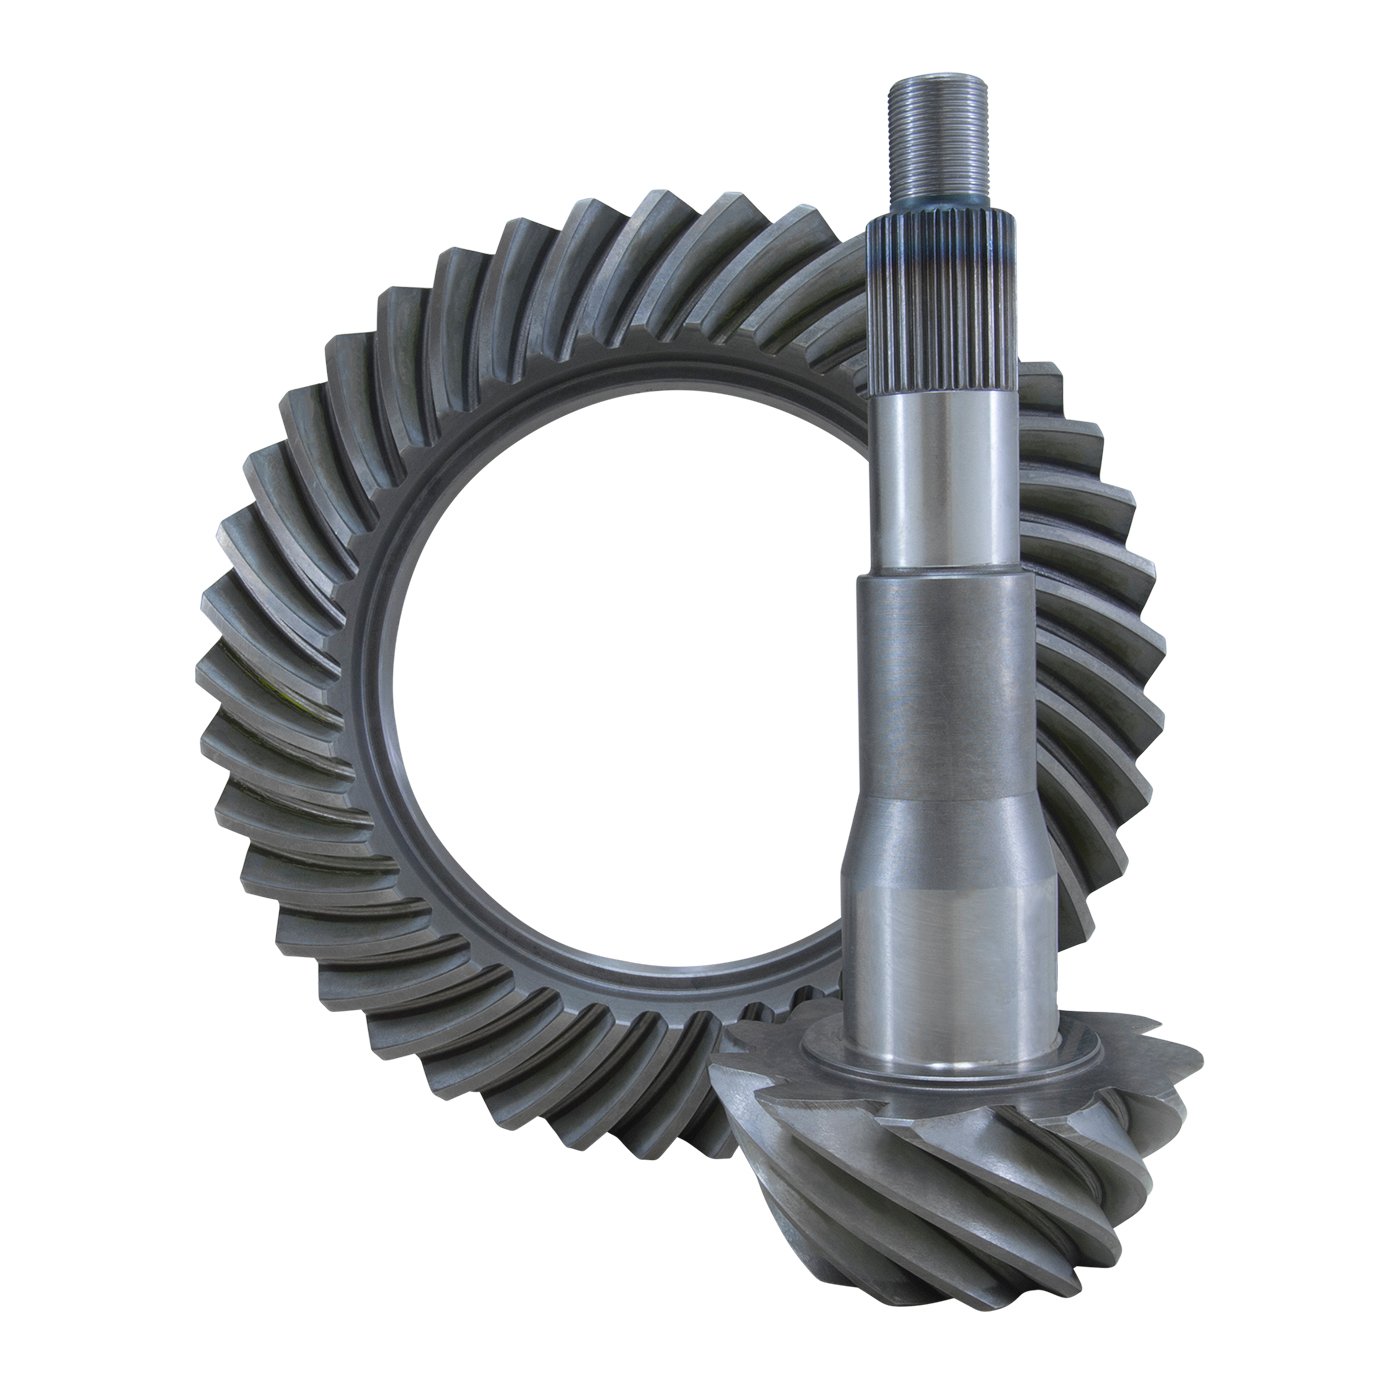 USA Standard 36104 Ring & Pinion Gear Set, For Ford 10.25 in., 3.73 Ratio